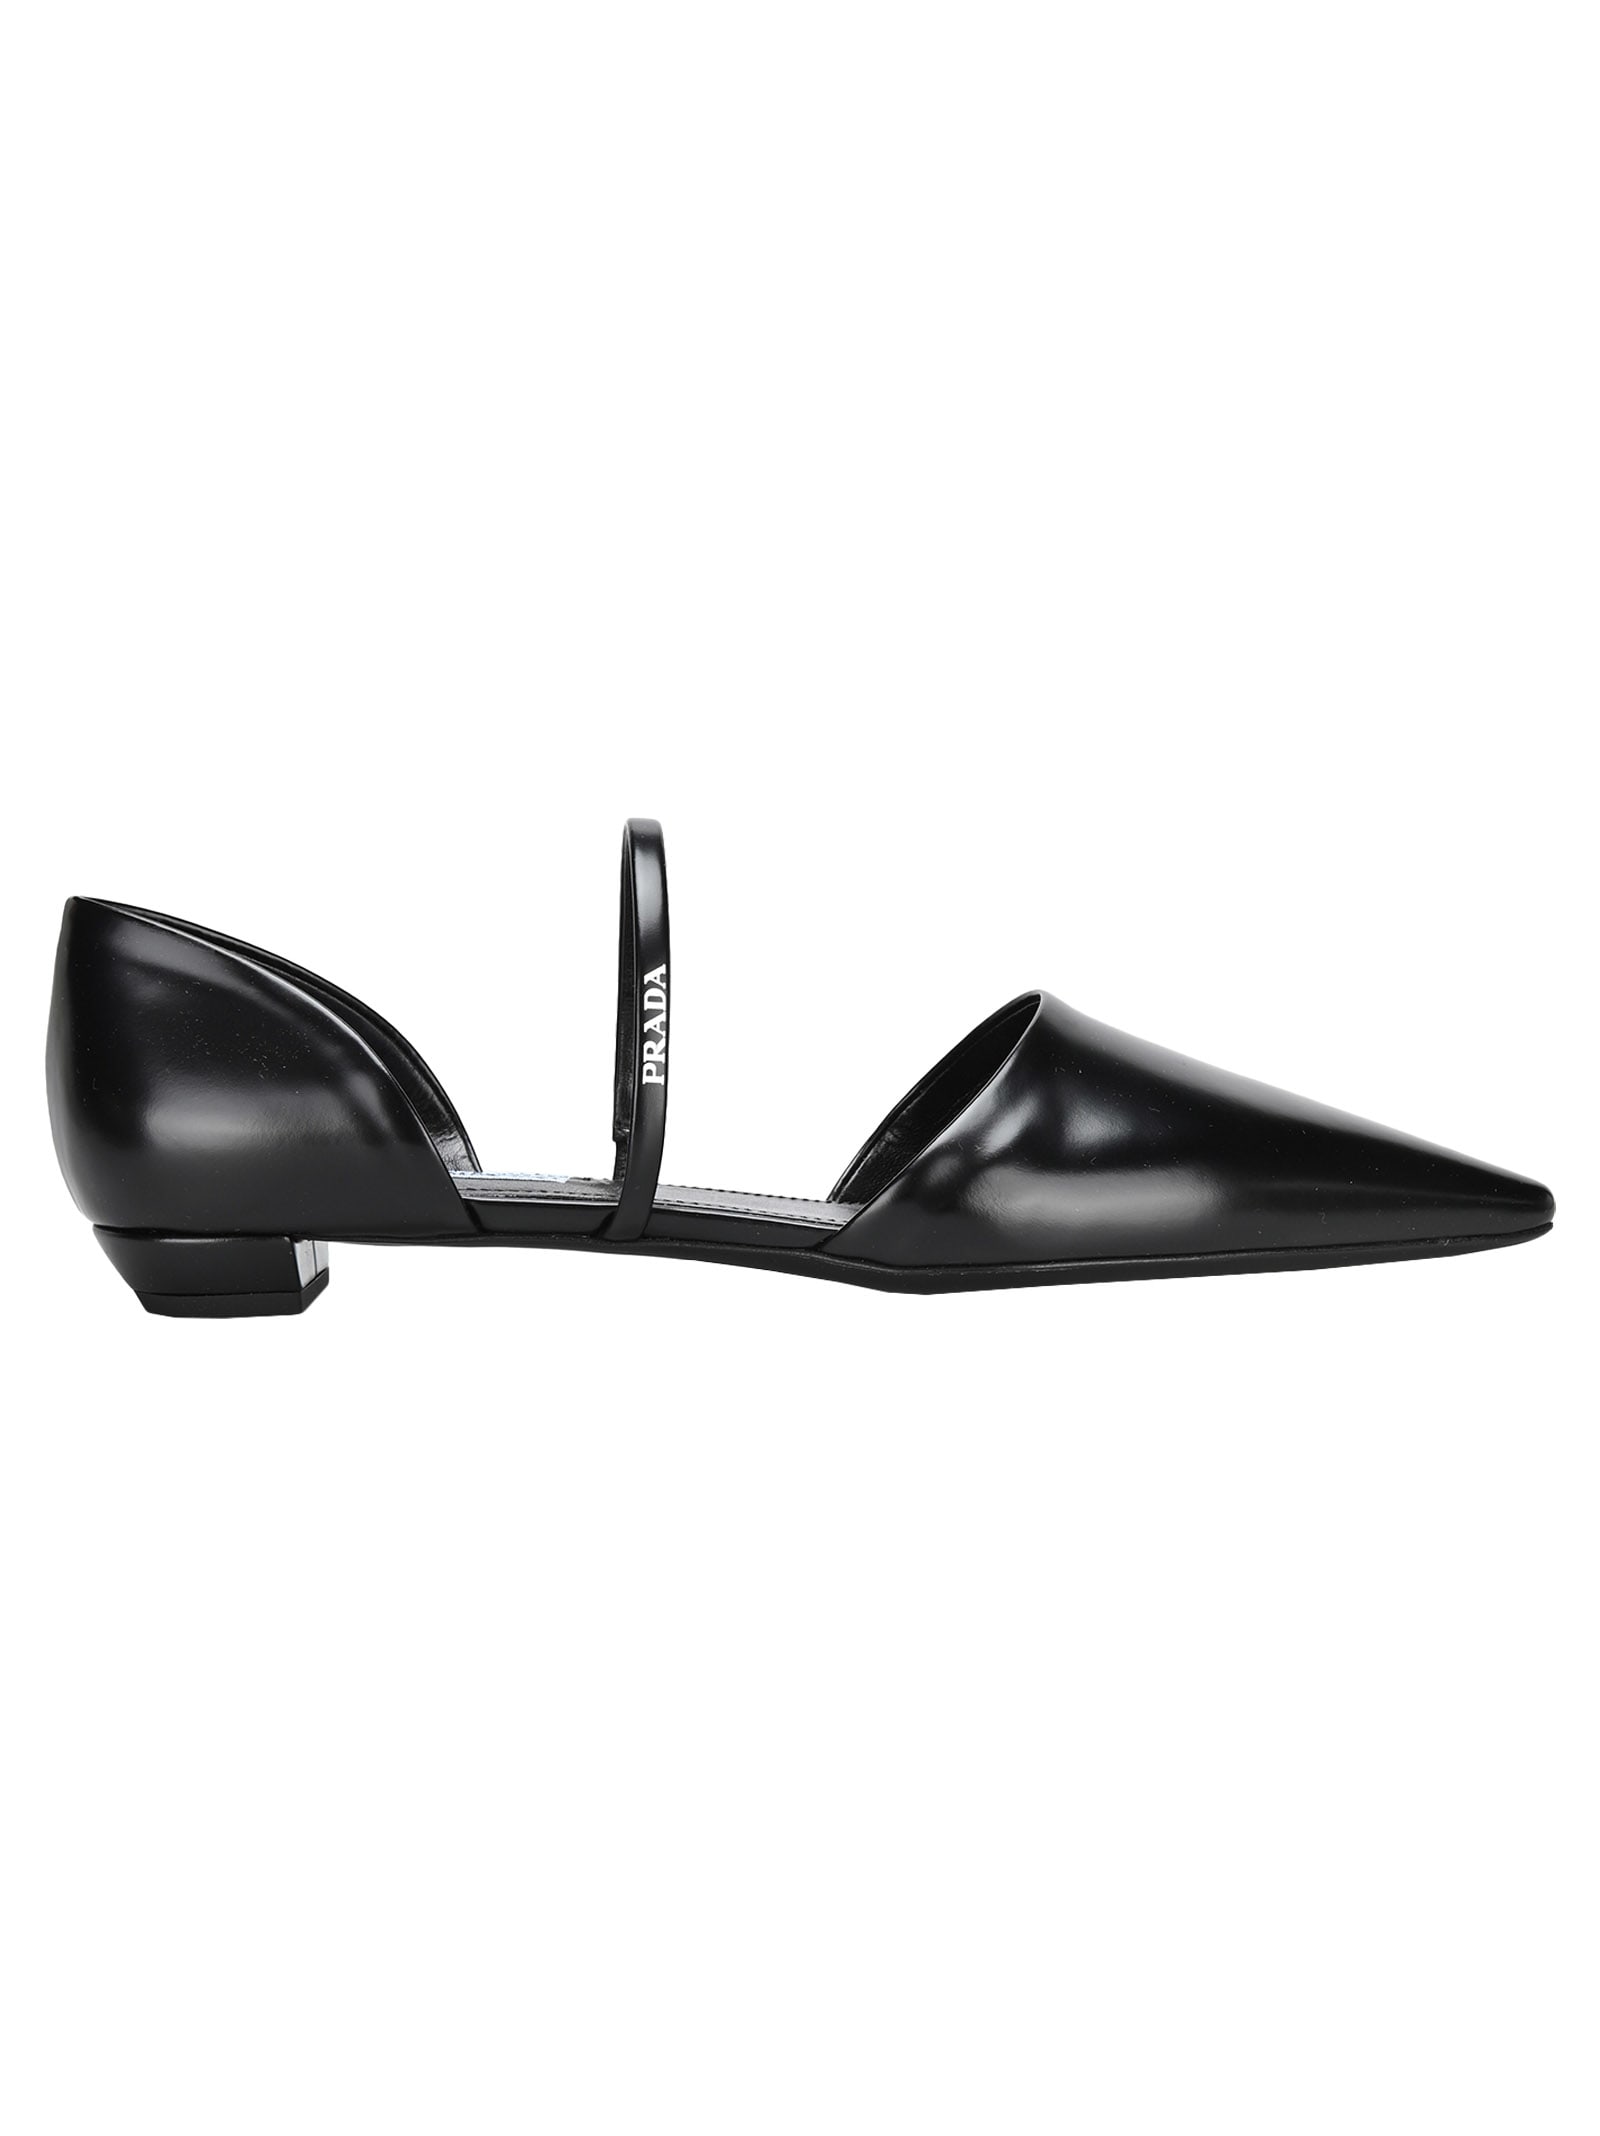 Buy Prada Ballerina Leather online, shop Prada shoes with free shipping